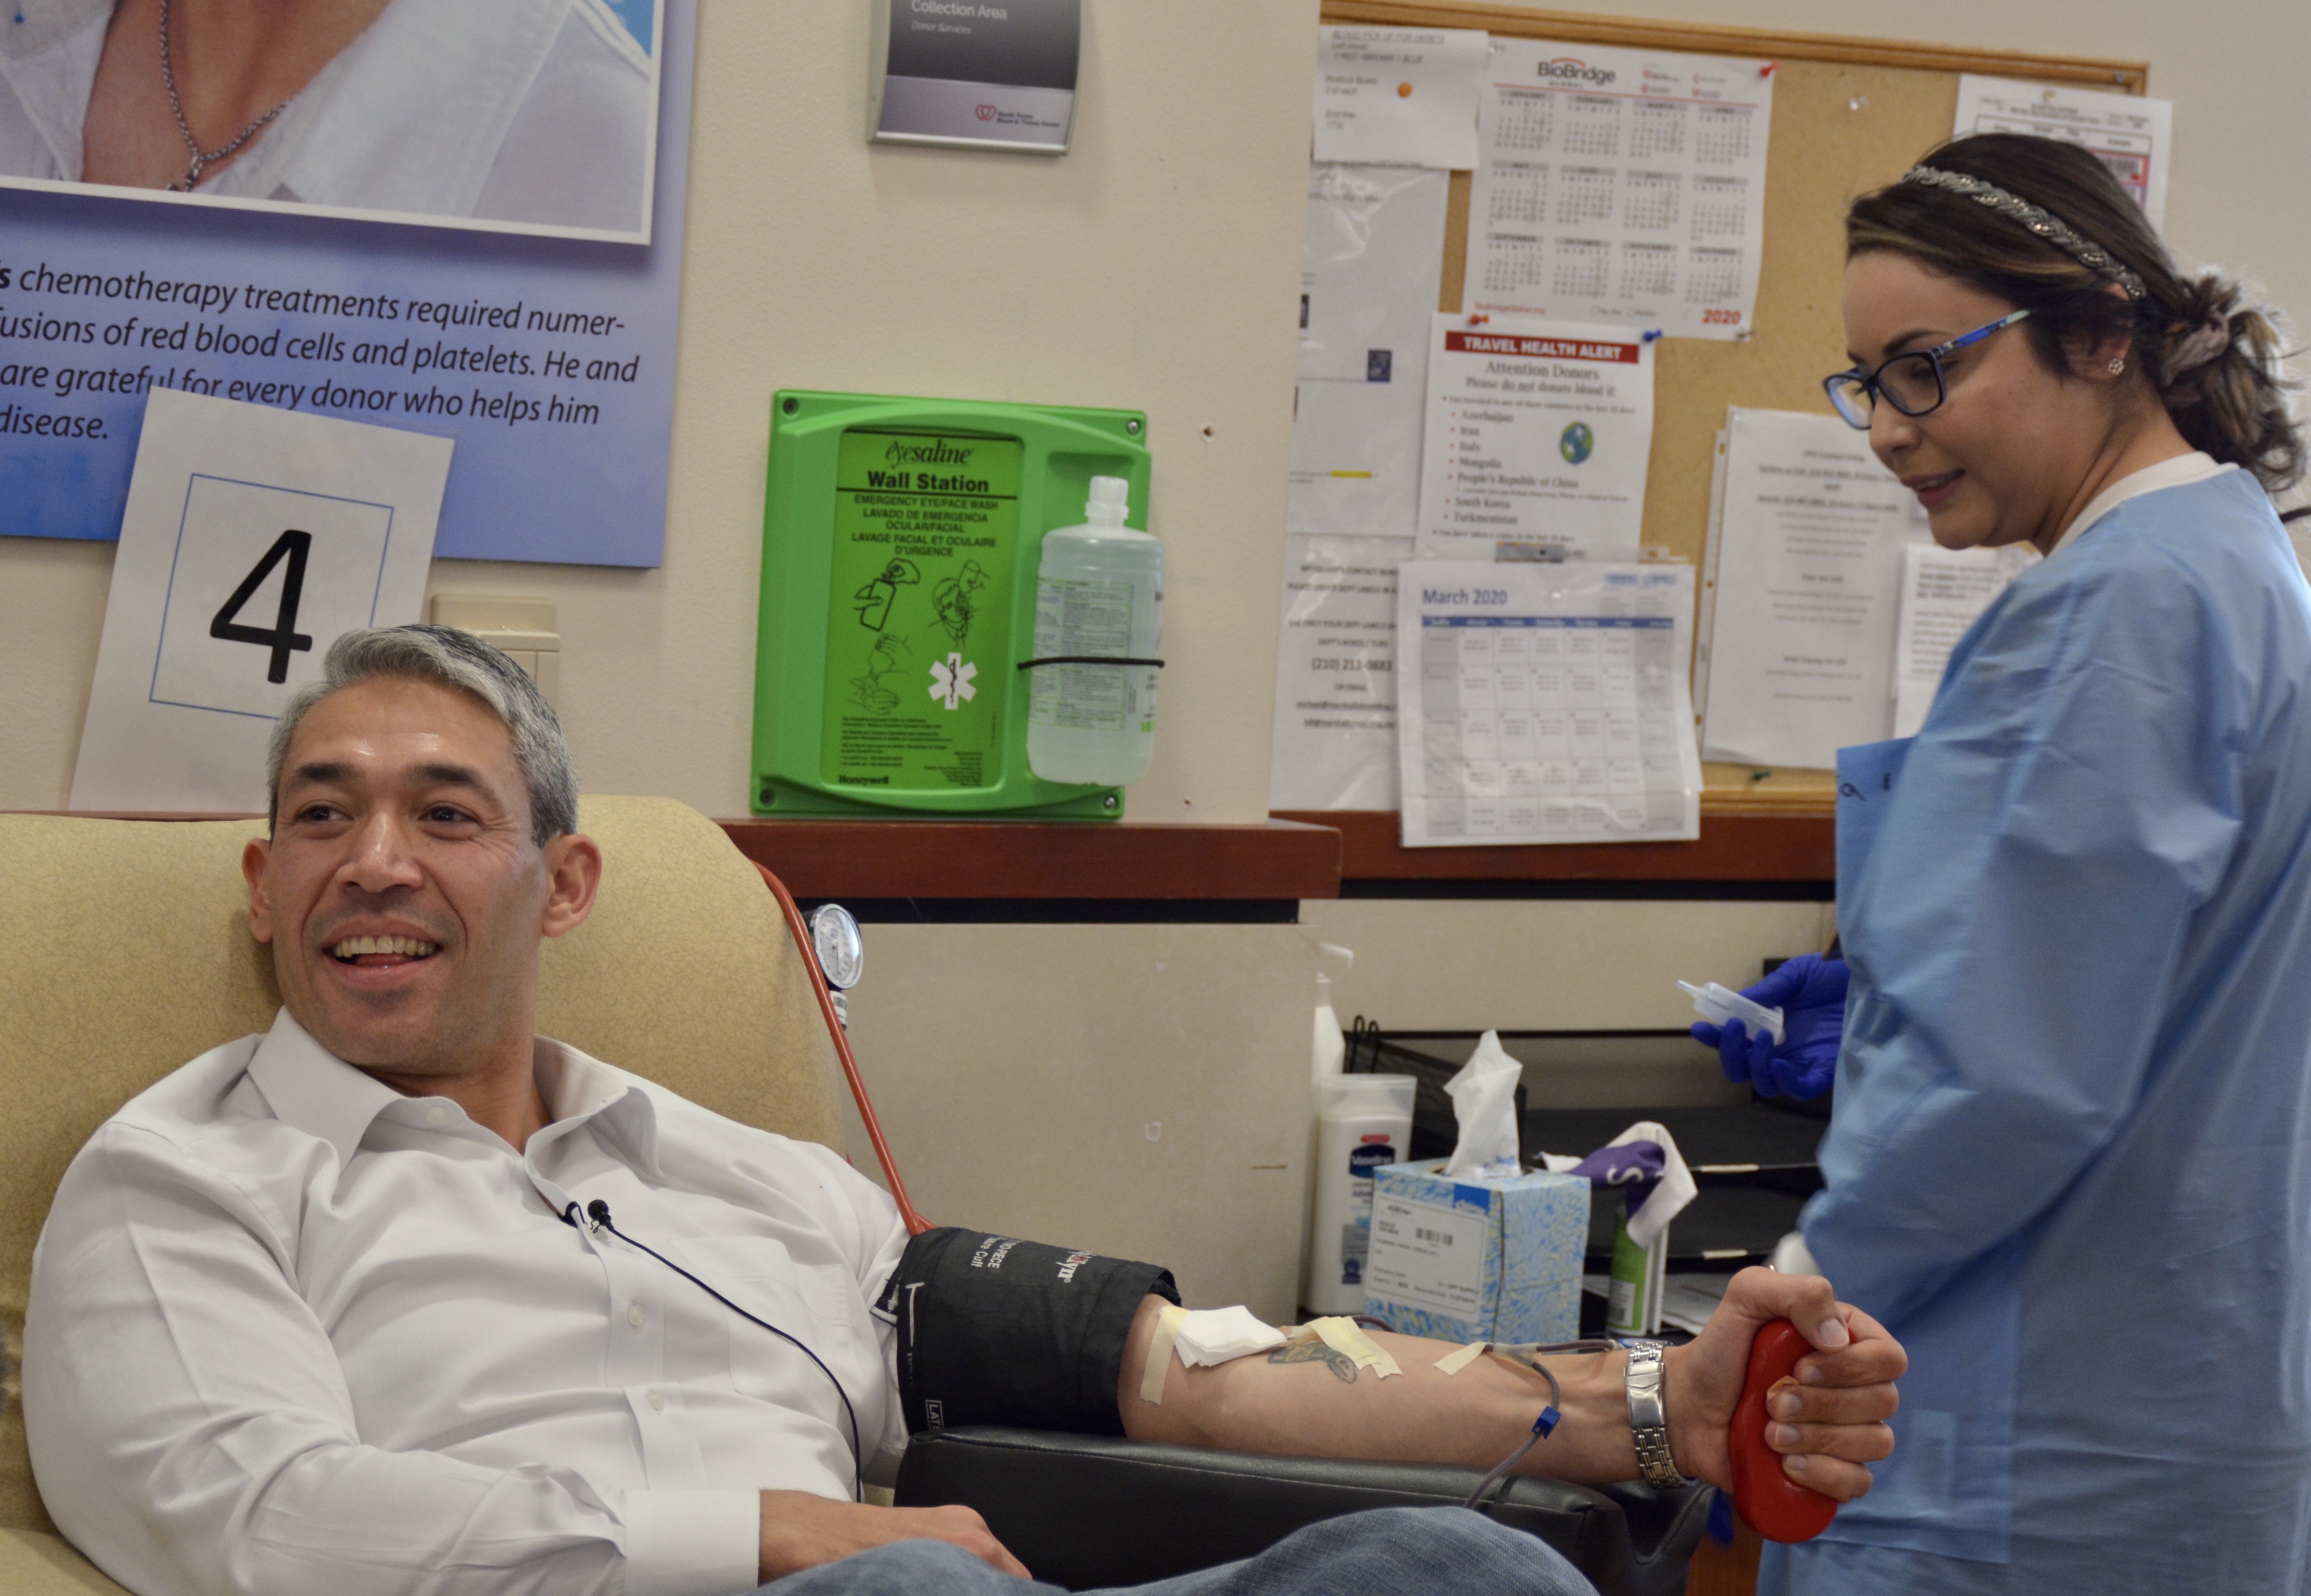 San Antonio Mayor Ron Nirenberg donates blood after designating blood donation an 'essential city function' at a news conference on Saturday, March 14. The mayor said "Just like you are considering your own work schedules and making sure you’re taking care of your children during the turbulence of the next few weeks, we also need you to consider your neighbors in need…. Your actions now really matter and can save lives.” 